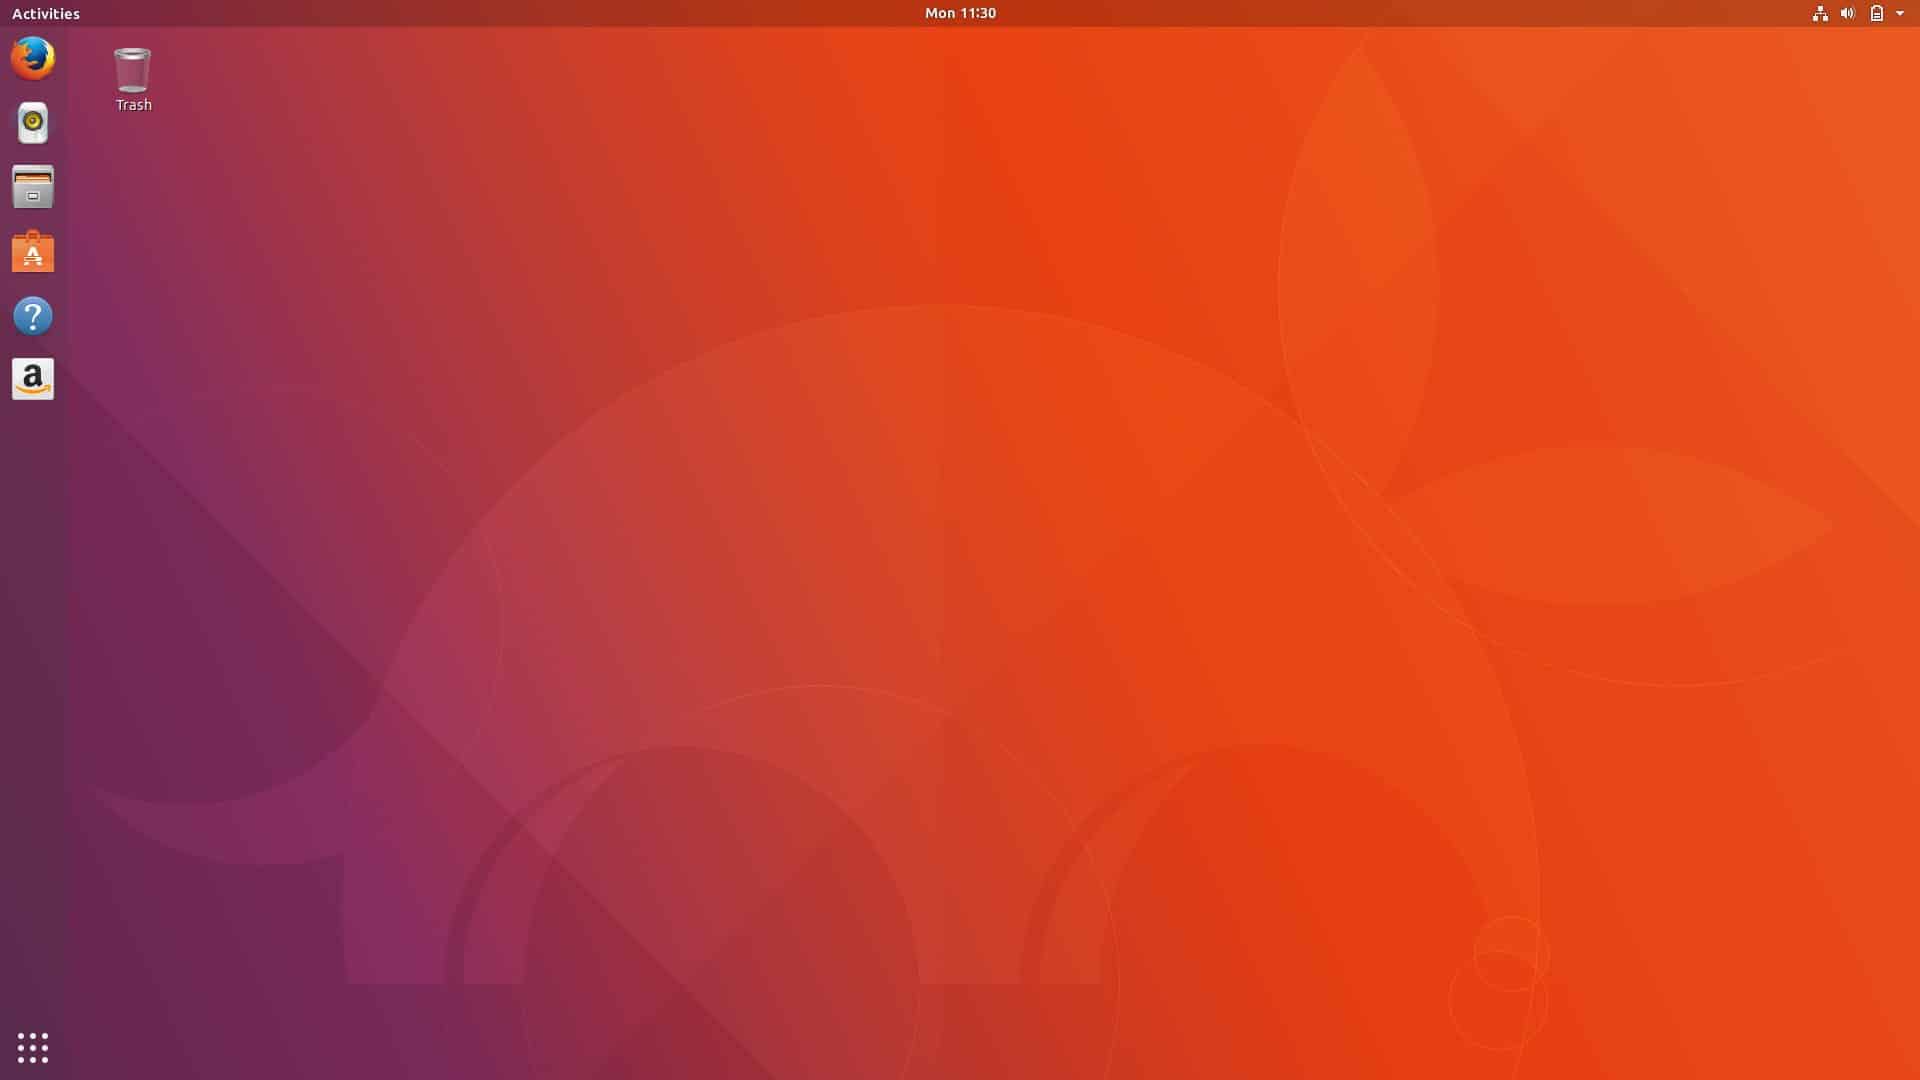 How To Install Stock GNOME Shell On Ubuntu